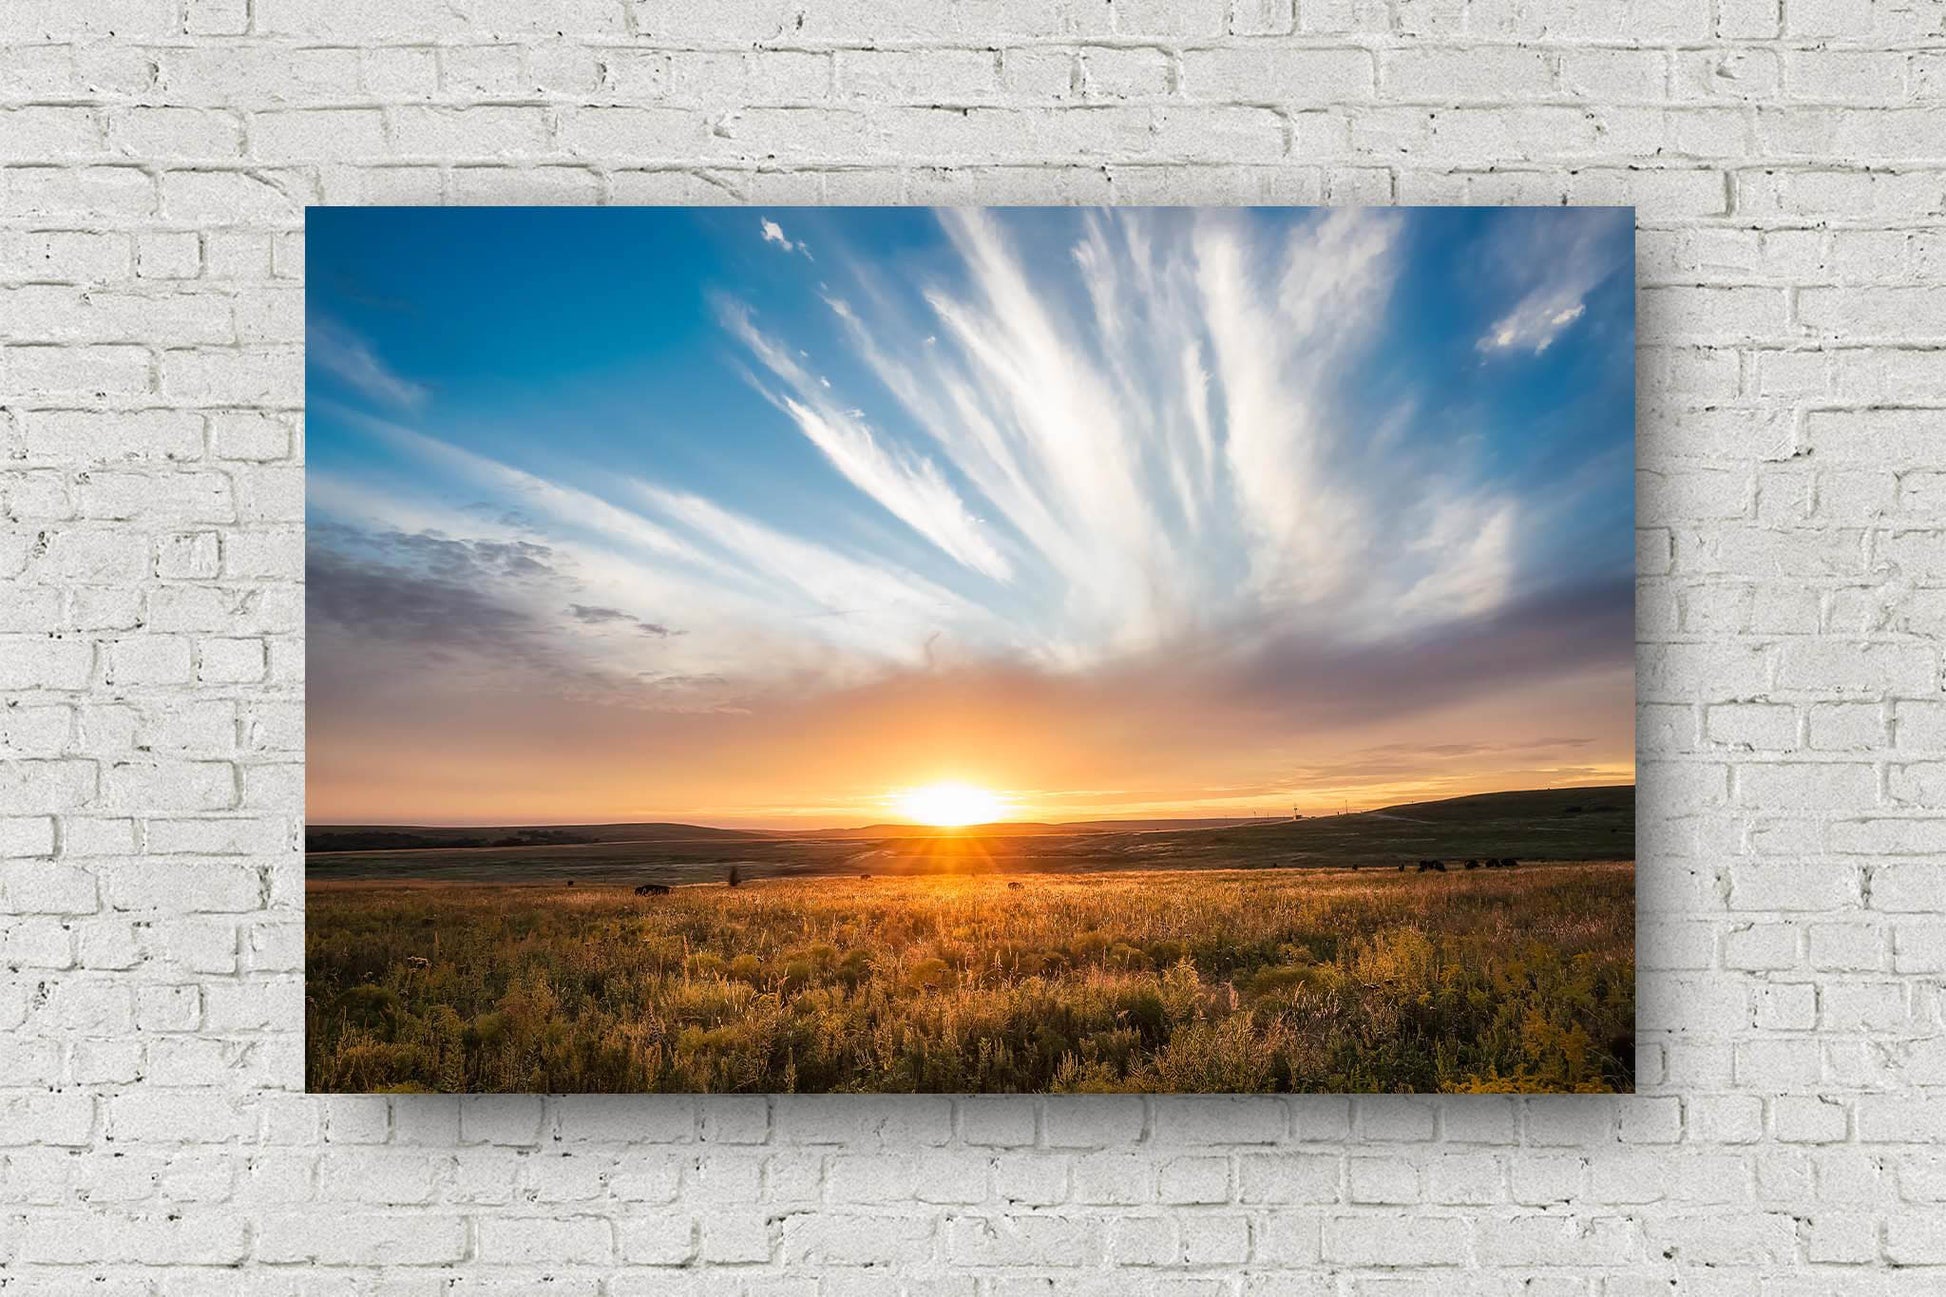 Great Plains metal print on aluminum of a scenic sunset over the Tallgrass Prairie in Osage County, Oklahoma by Sean Ramsey of Southern Plains Photography.